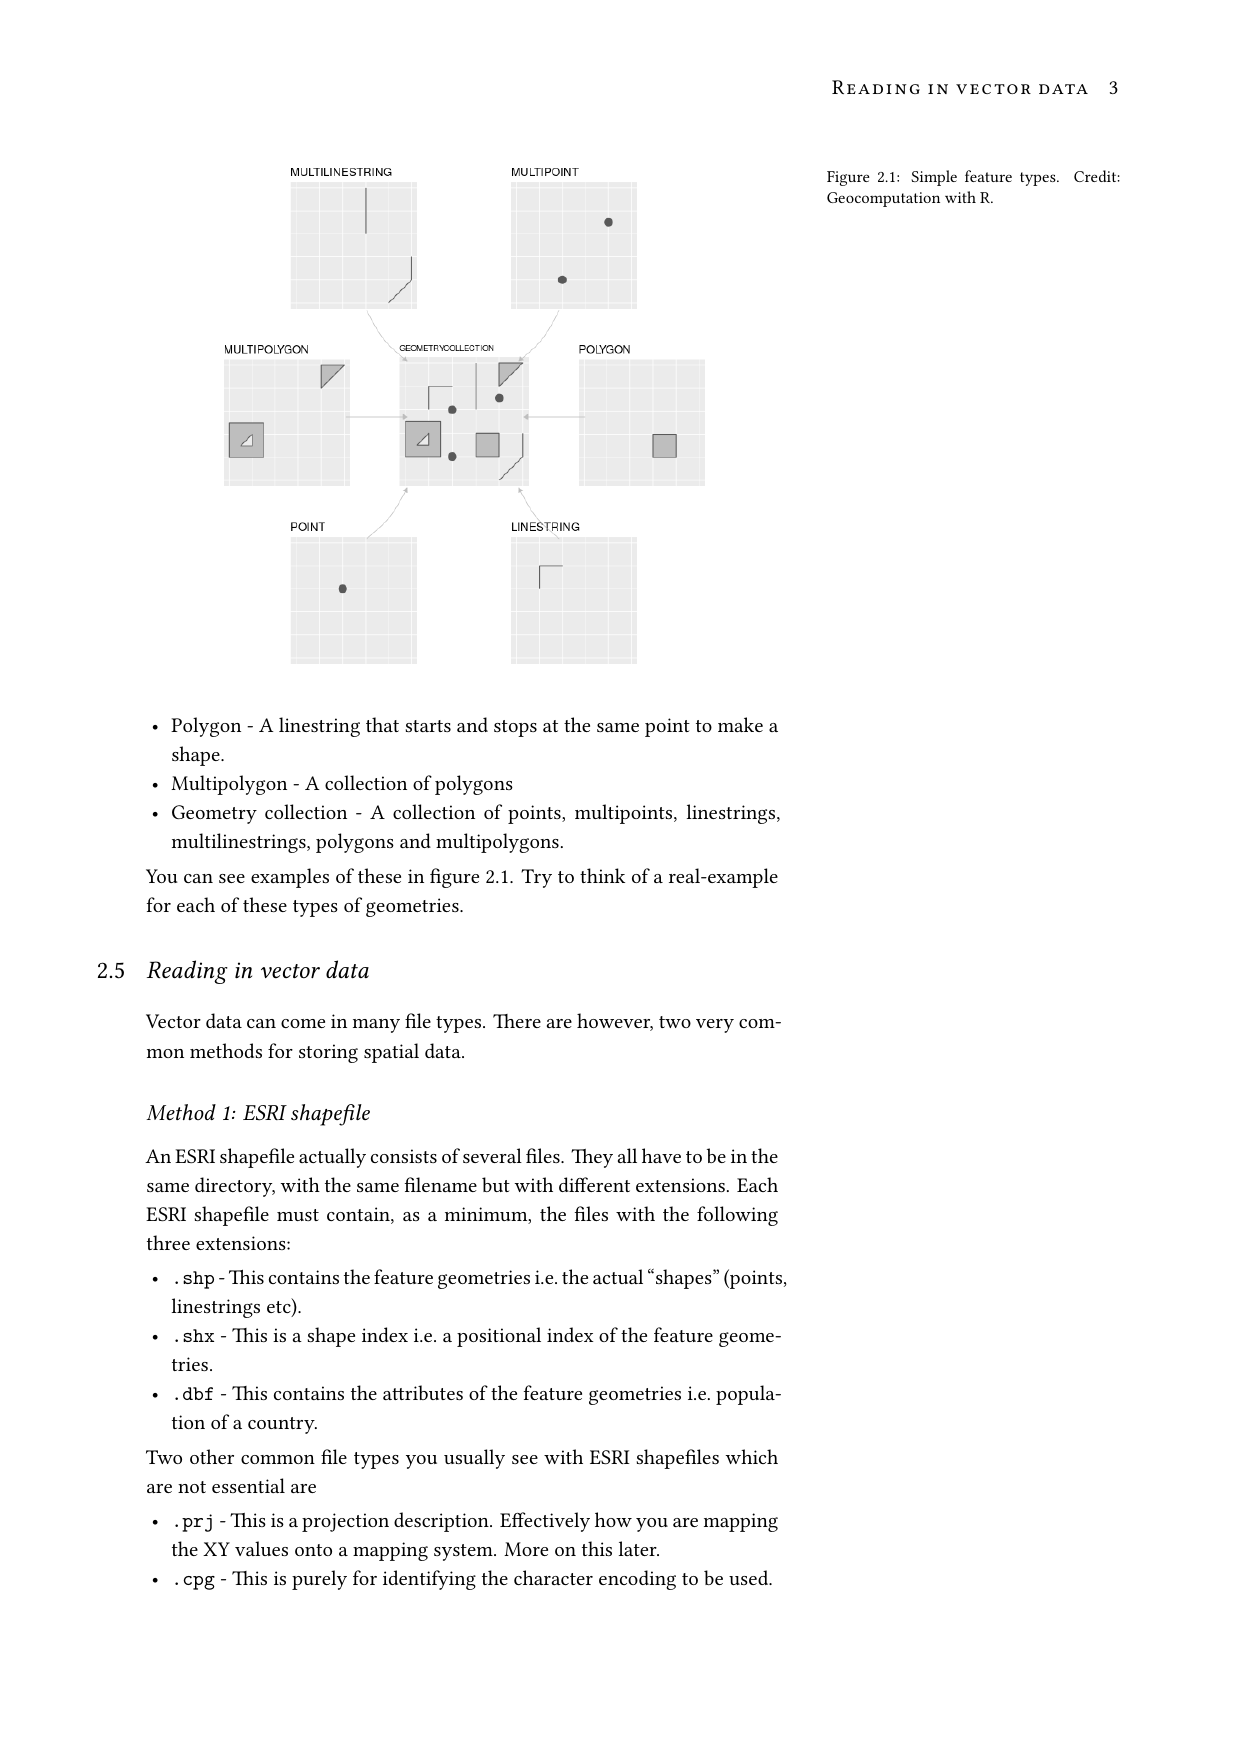 Page 3 of example course material for Spatial Data Analysis with R